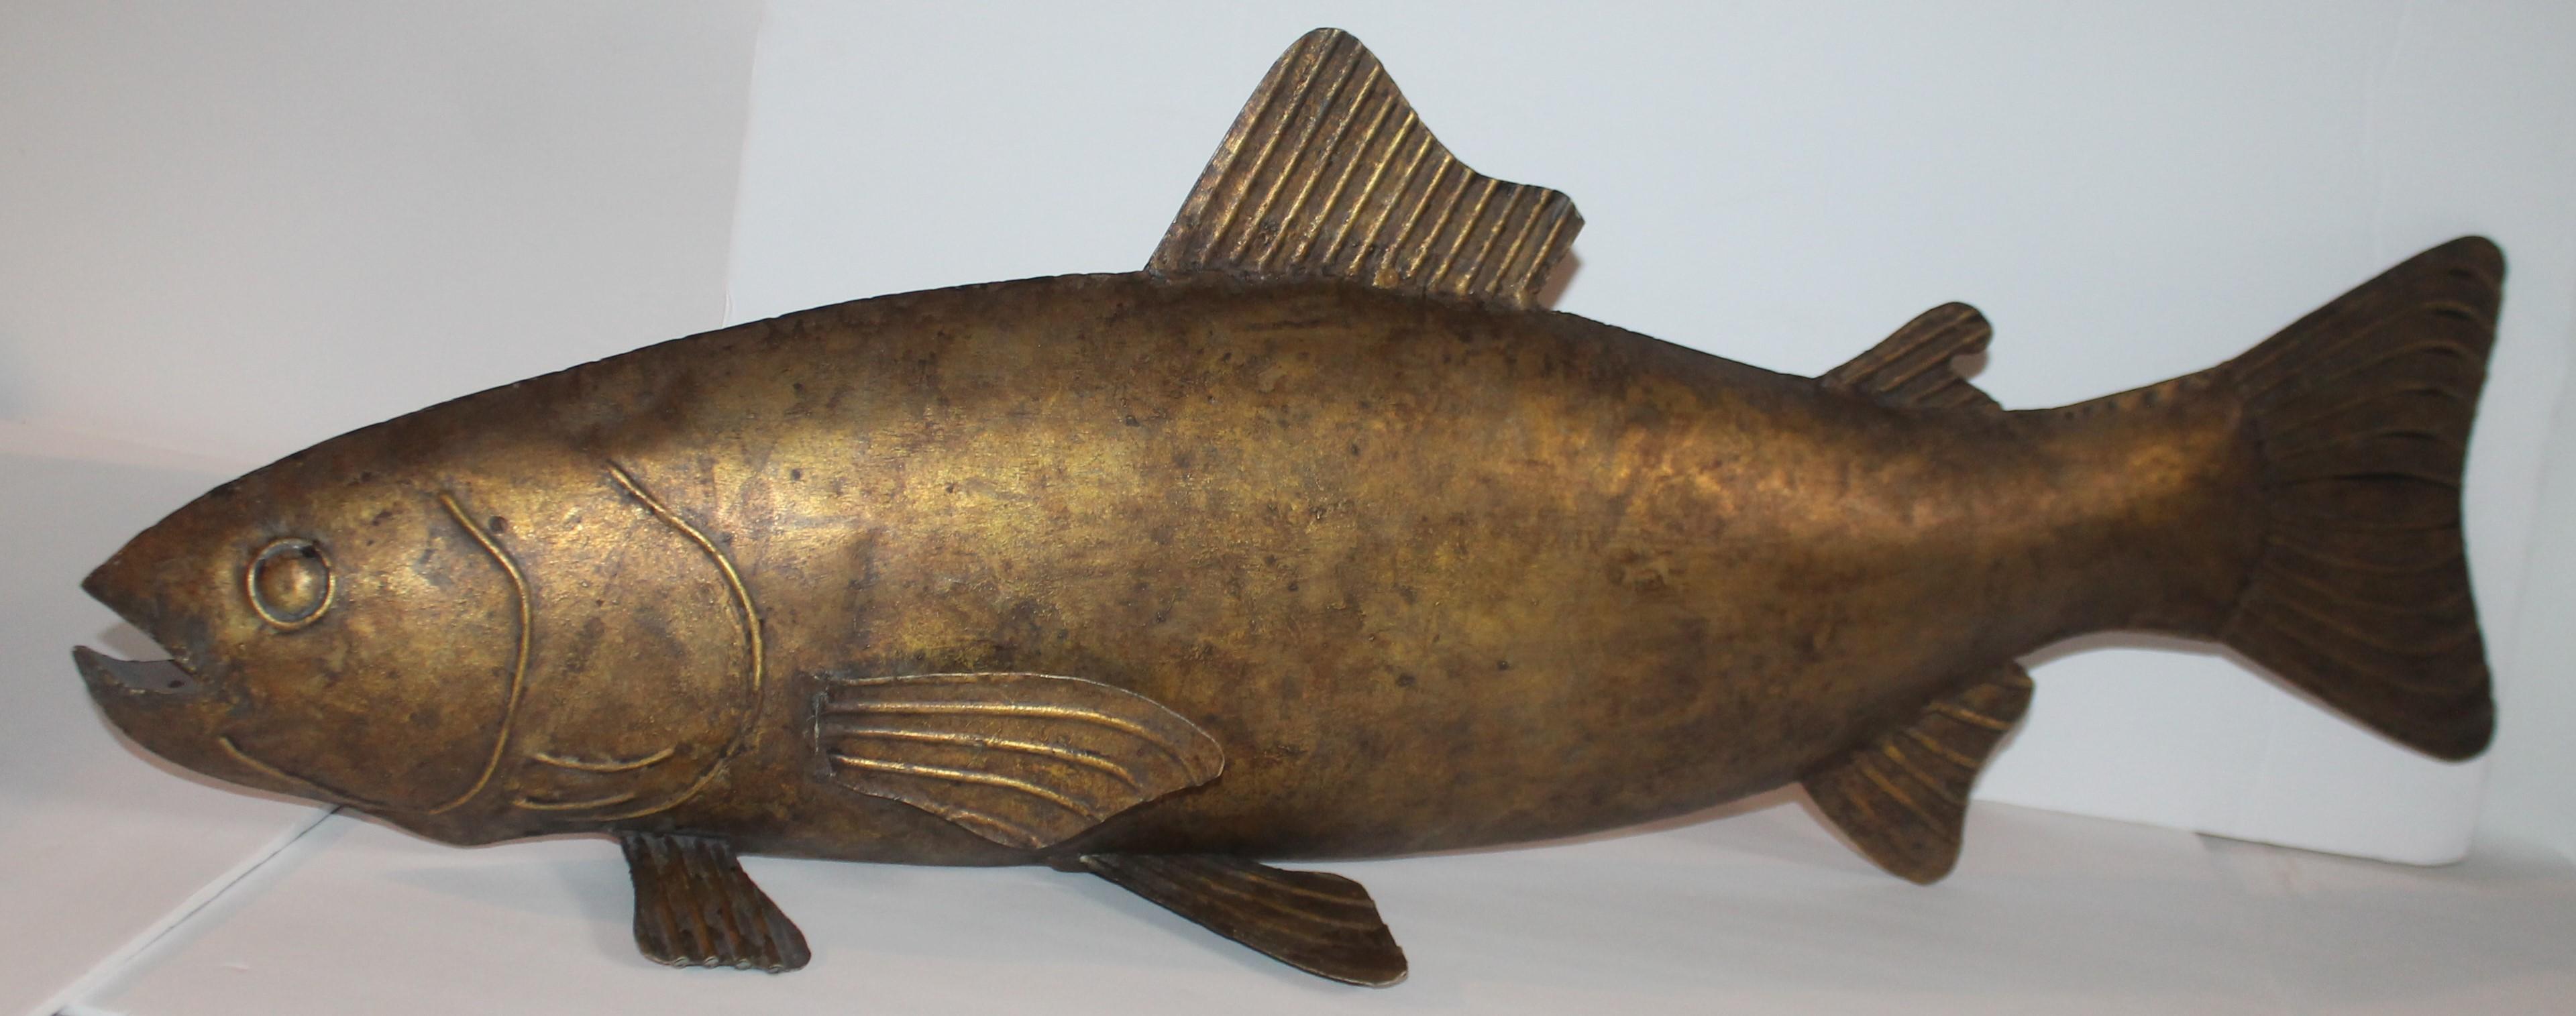 This amazing 20th century handmade Folk Art gilded metal sculpture of a fish is in fine condition. It is unsigned and not sure if it was made to hang in a fish house or grill. Perhaps on a fresh fish market. Great as display on a shelf or cupboard.